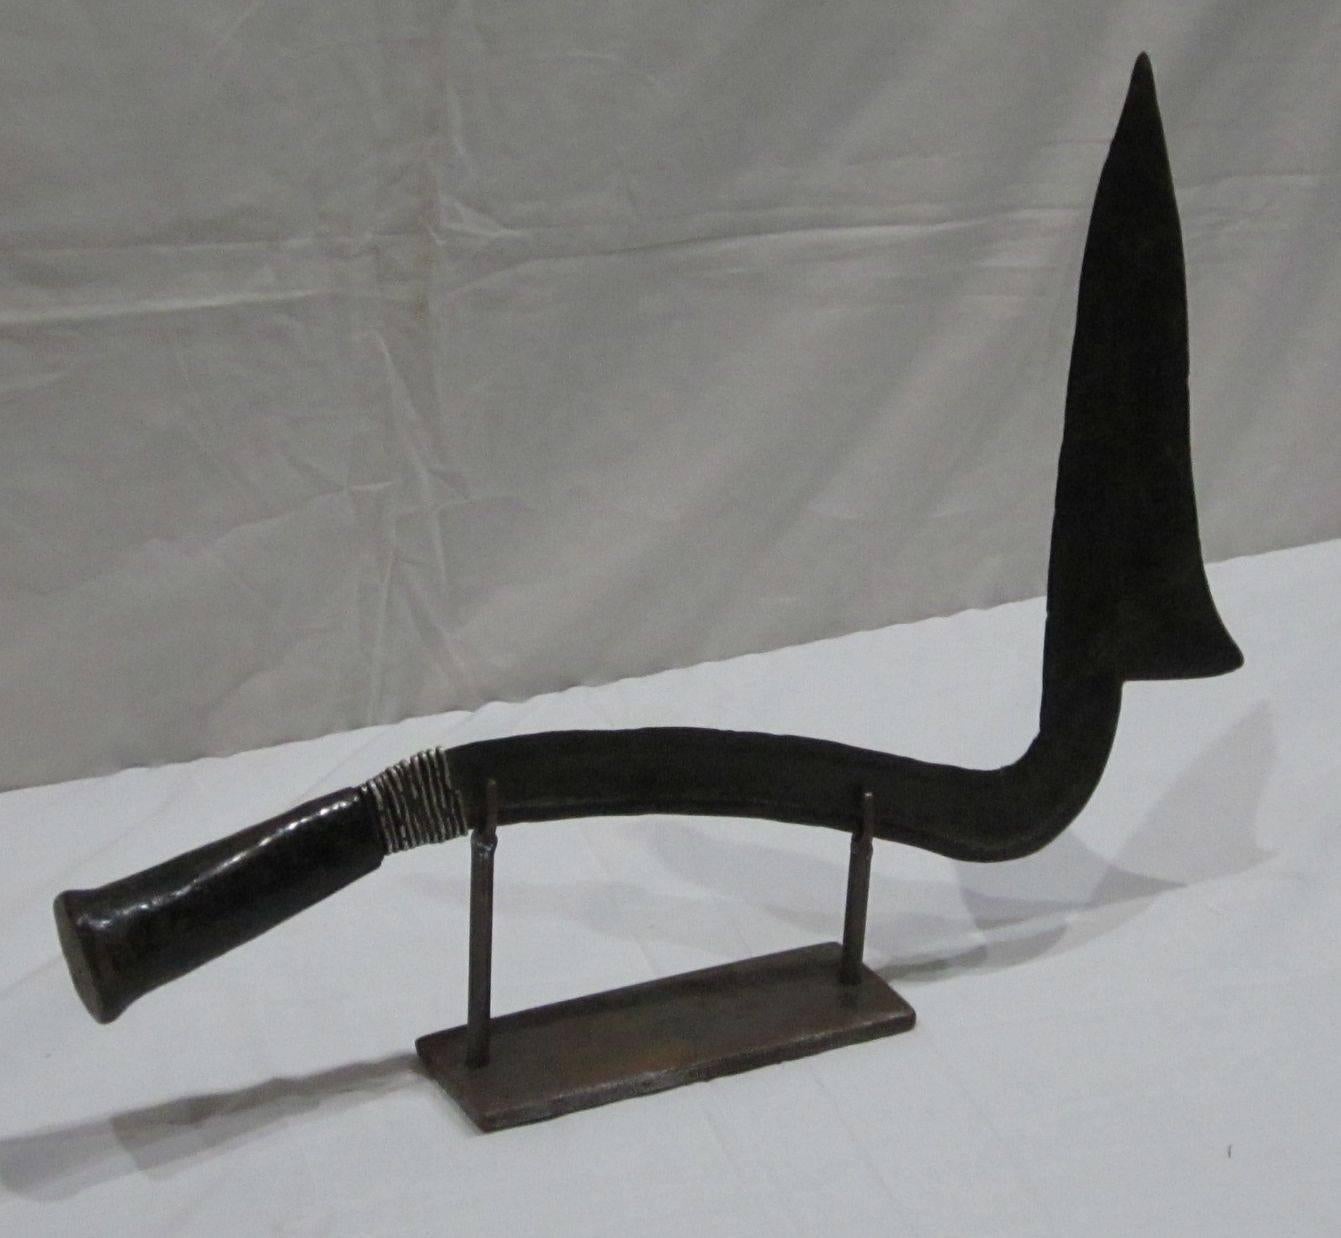 1920s African Congolese sword sculpture on metal stand.
Wooden handle. Base measures 8